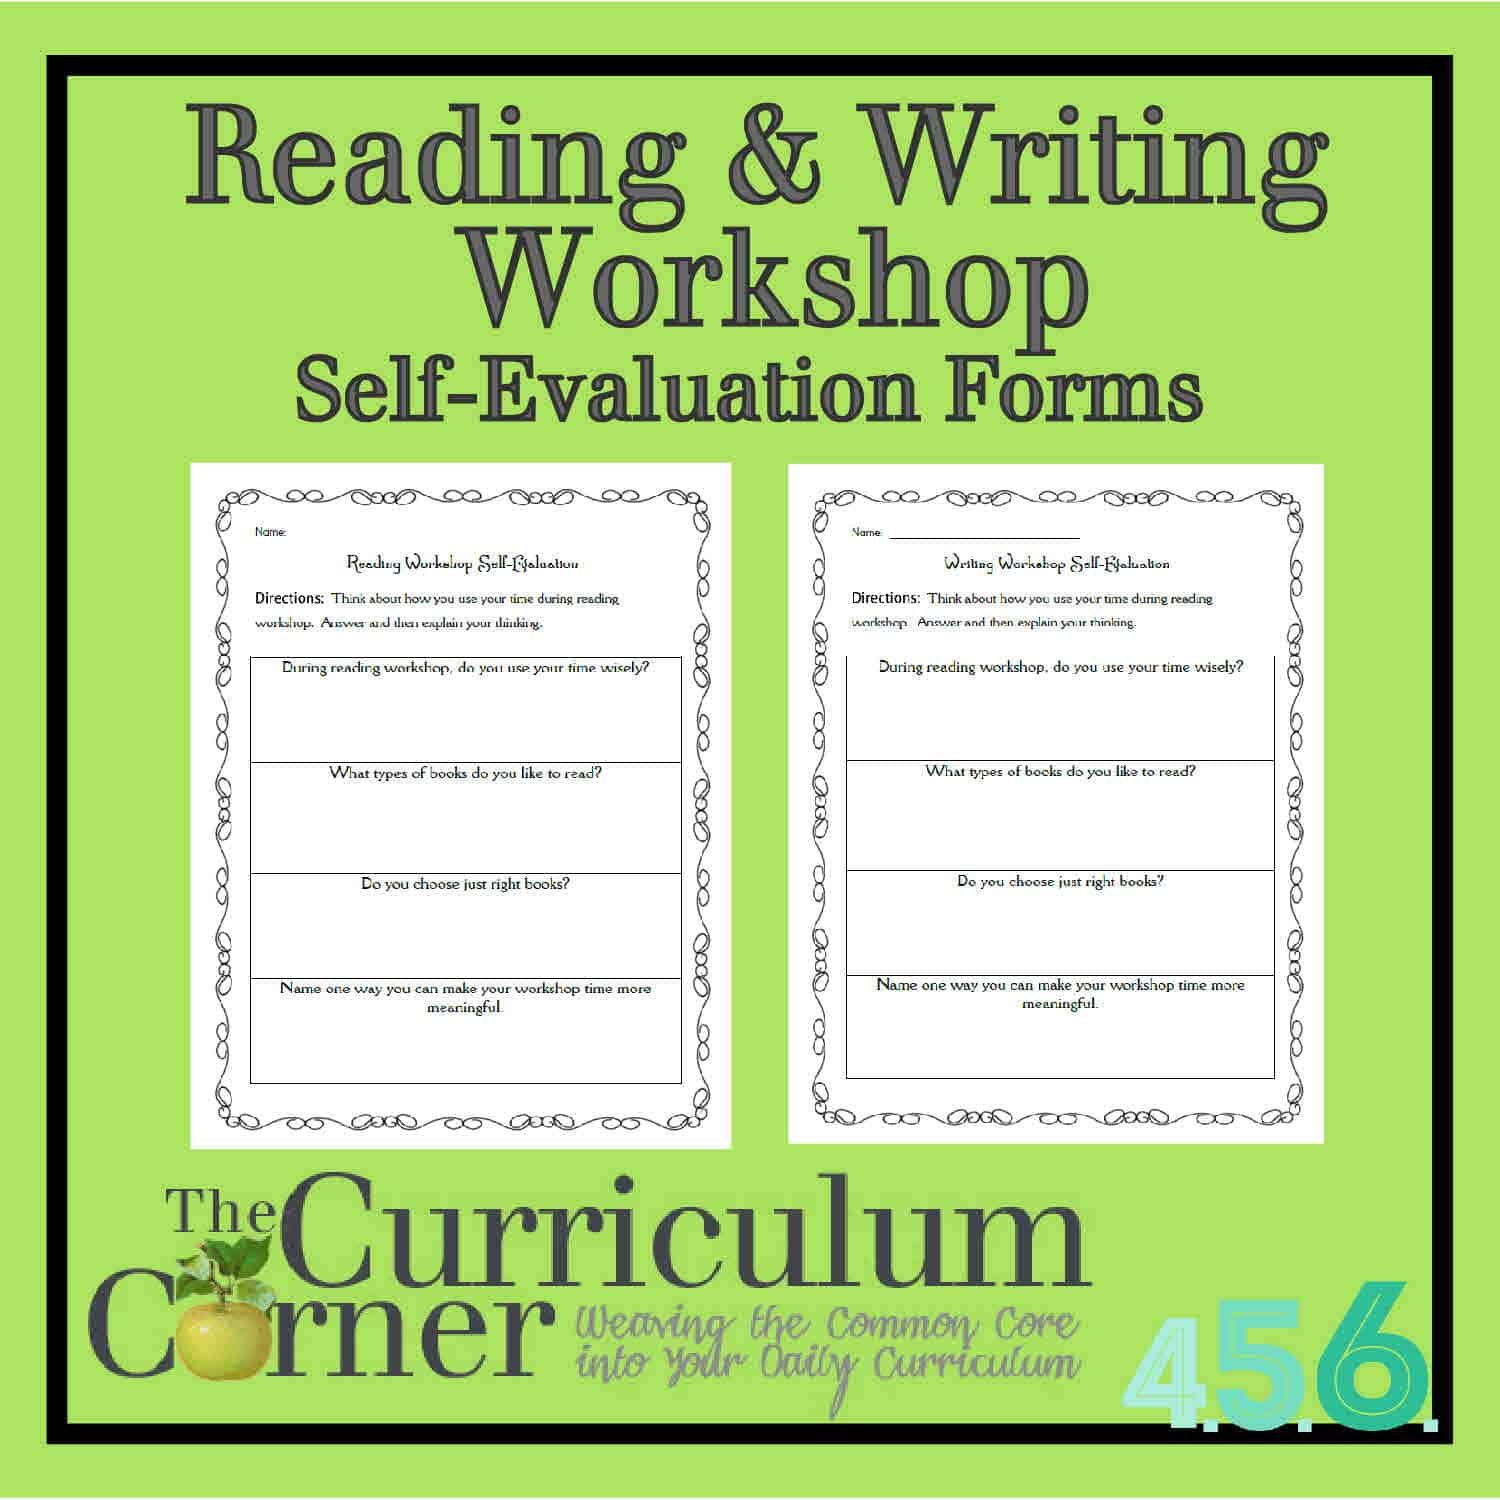 Reading & Writing Workshop Self Evaluation Forms.